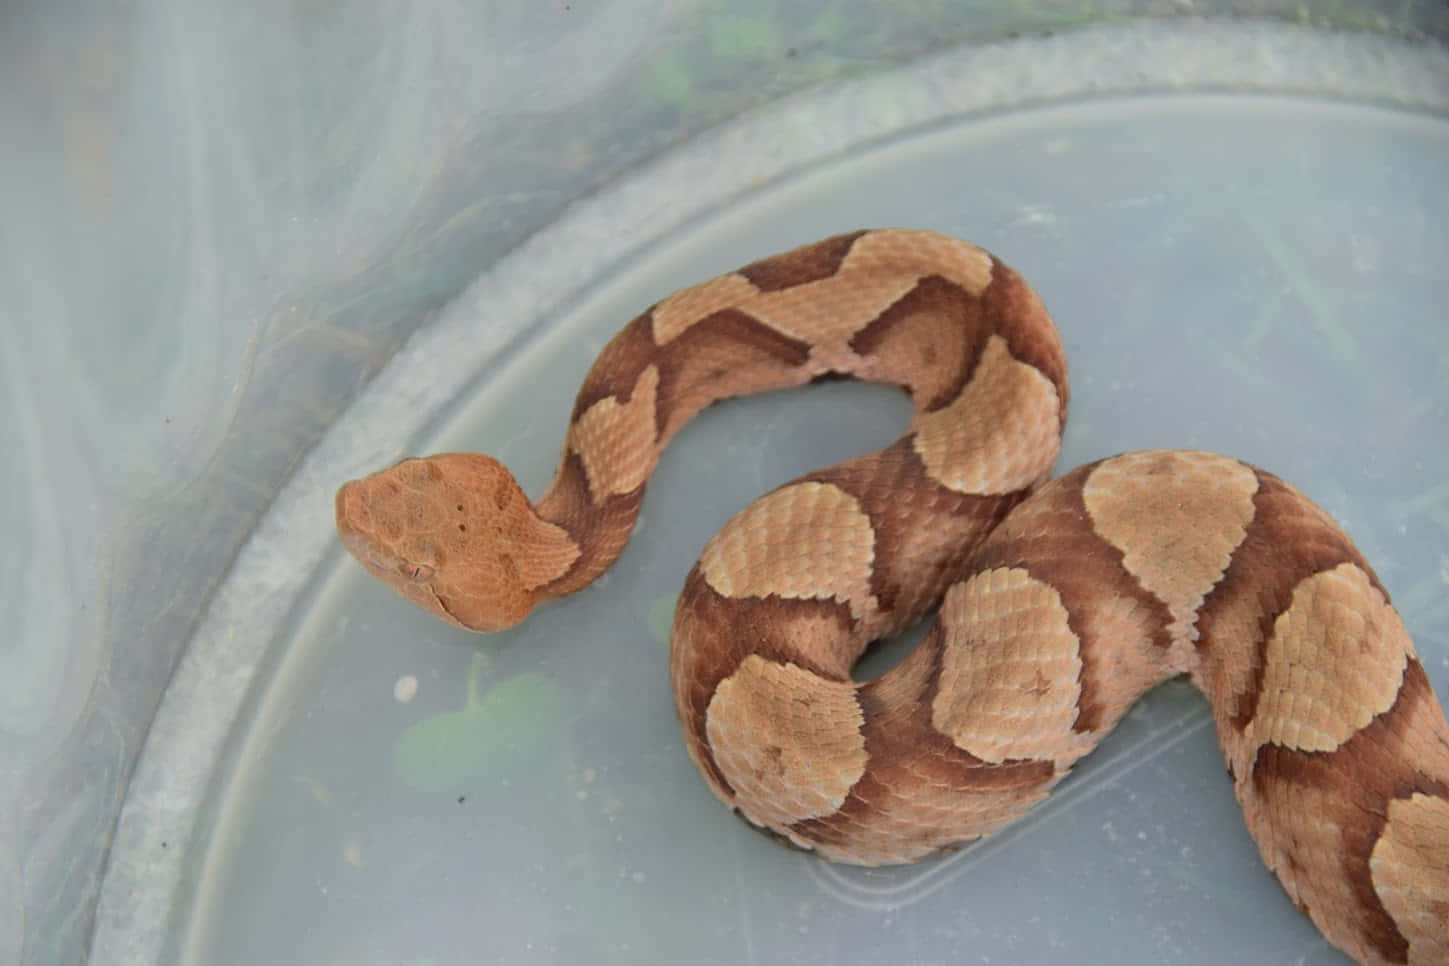 A close-up of a Copperhead Snake